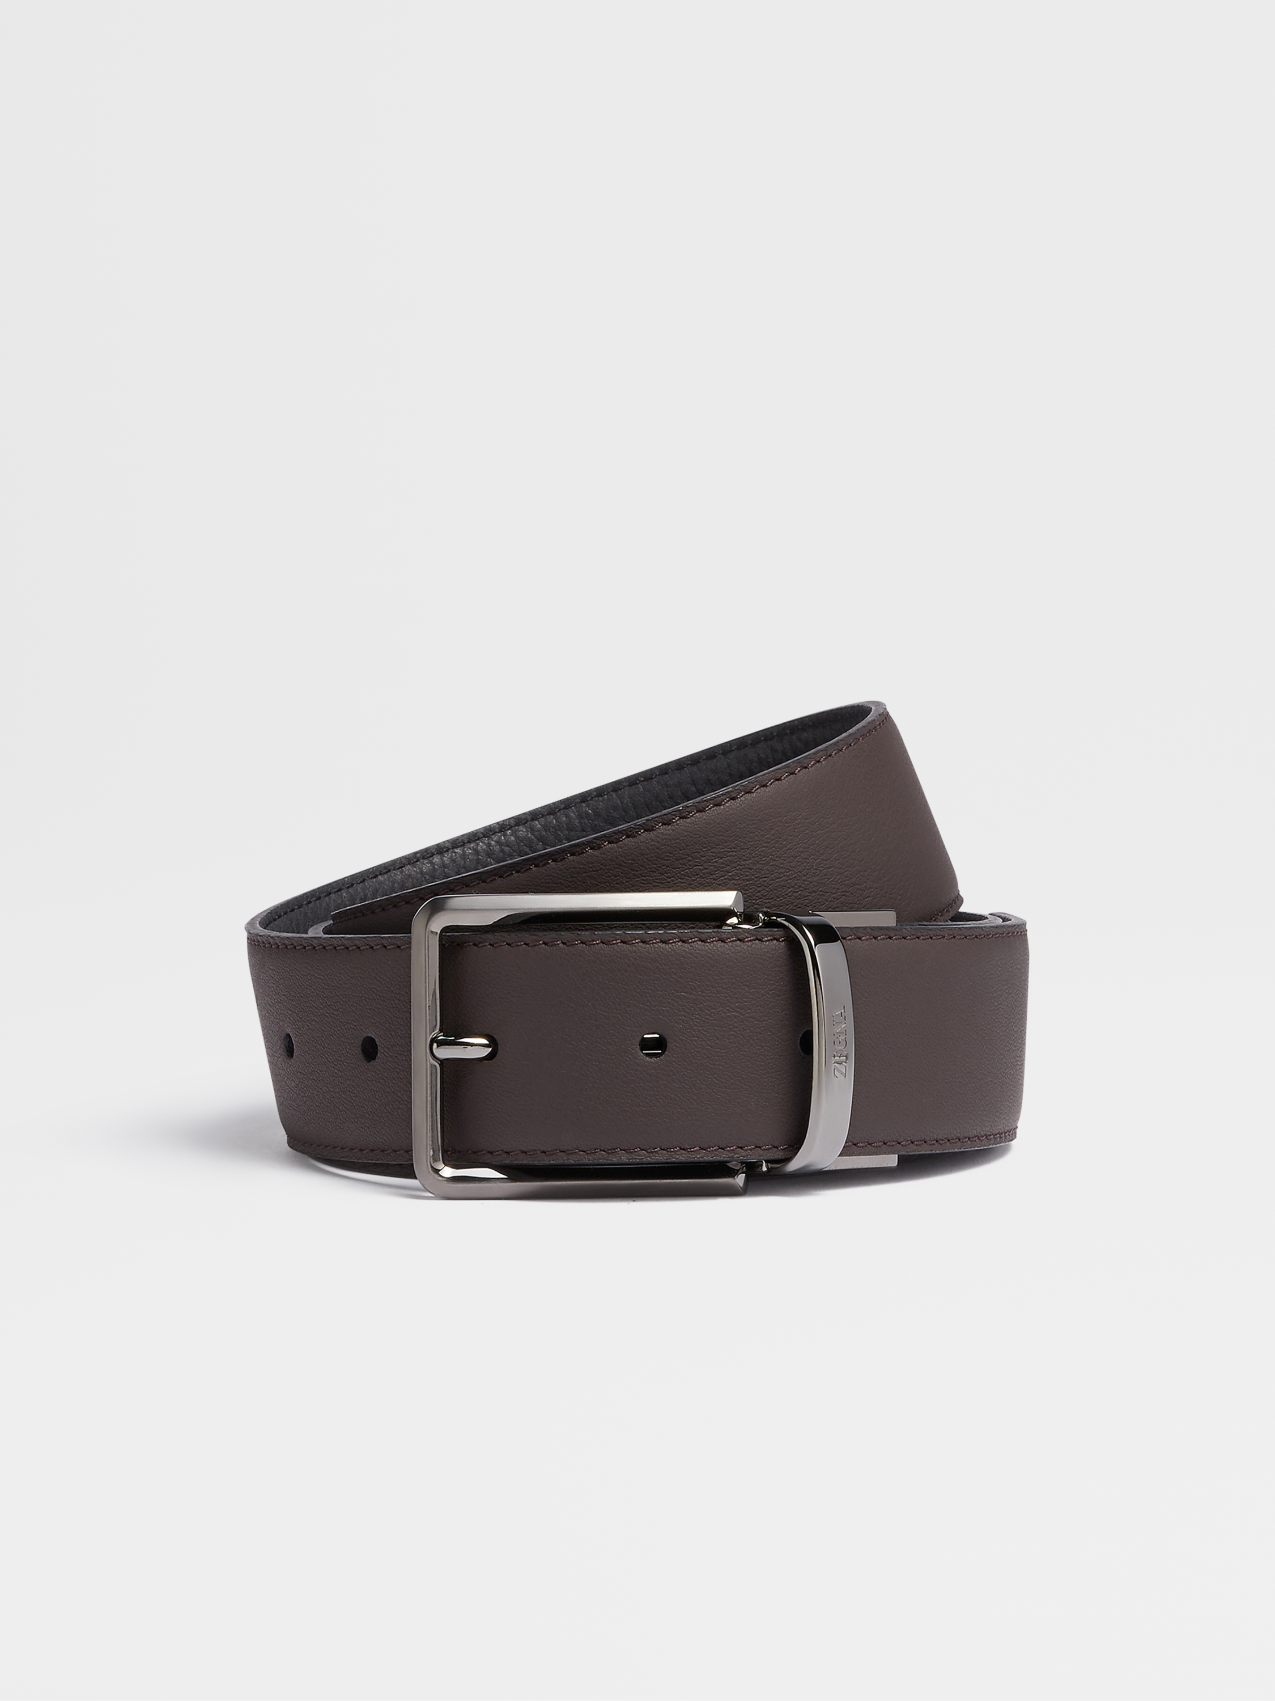 Dark Brown Smooth Leather and Black Grained Leather Reversible Belt